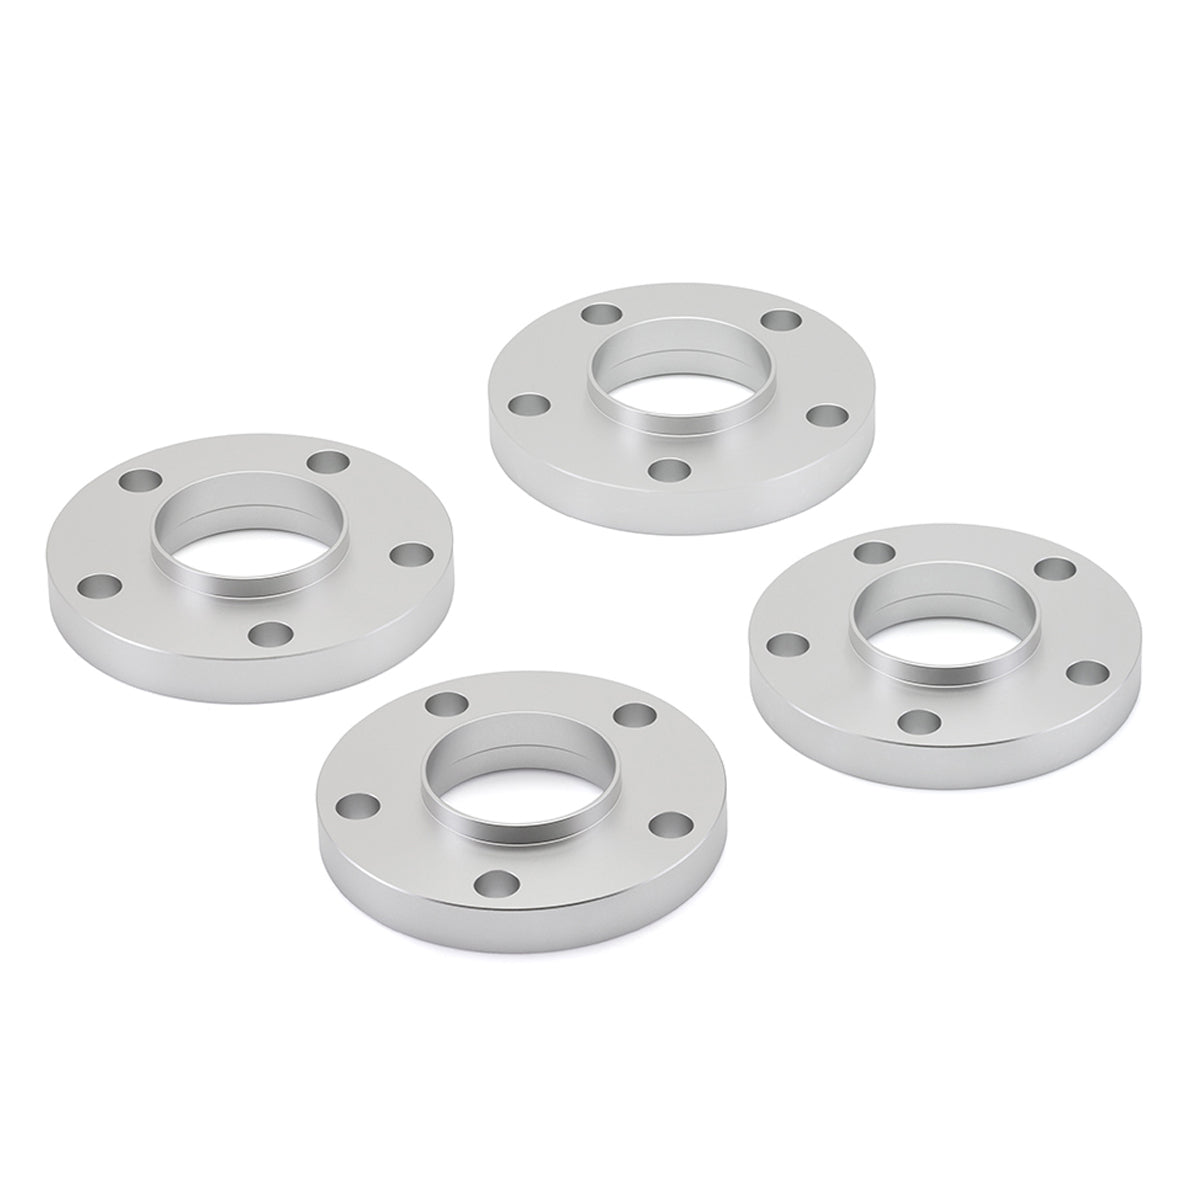 2009-2017 BMW 7 Series F01 F02 5x120 Hubcentric Wheelcentric Wheel Spacers set of 4